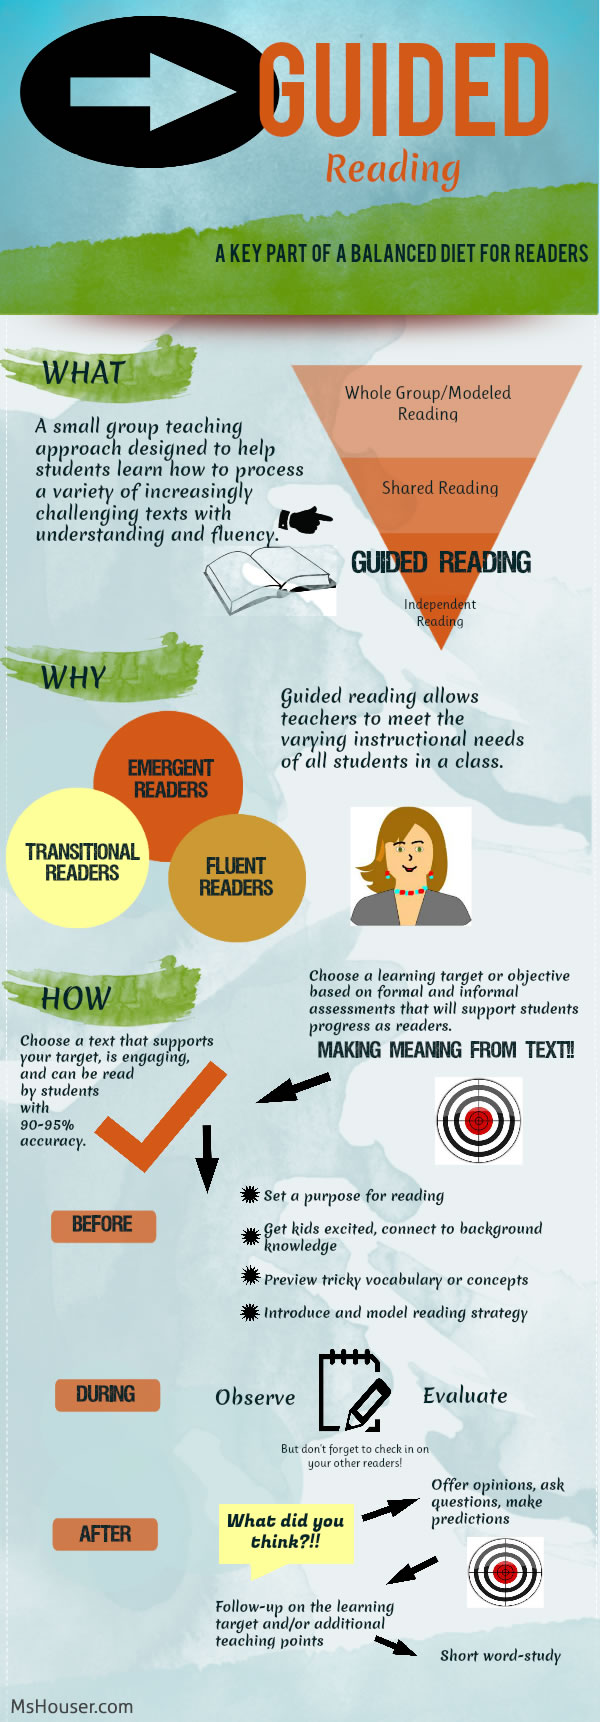 Guided Reading Infographic